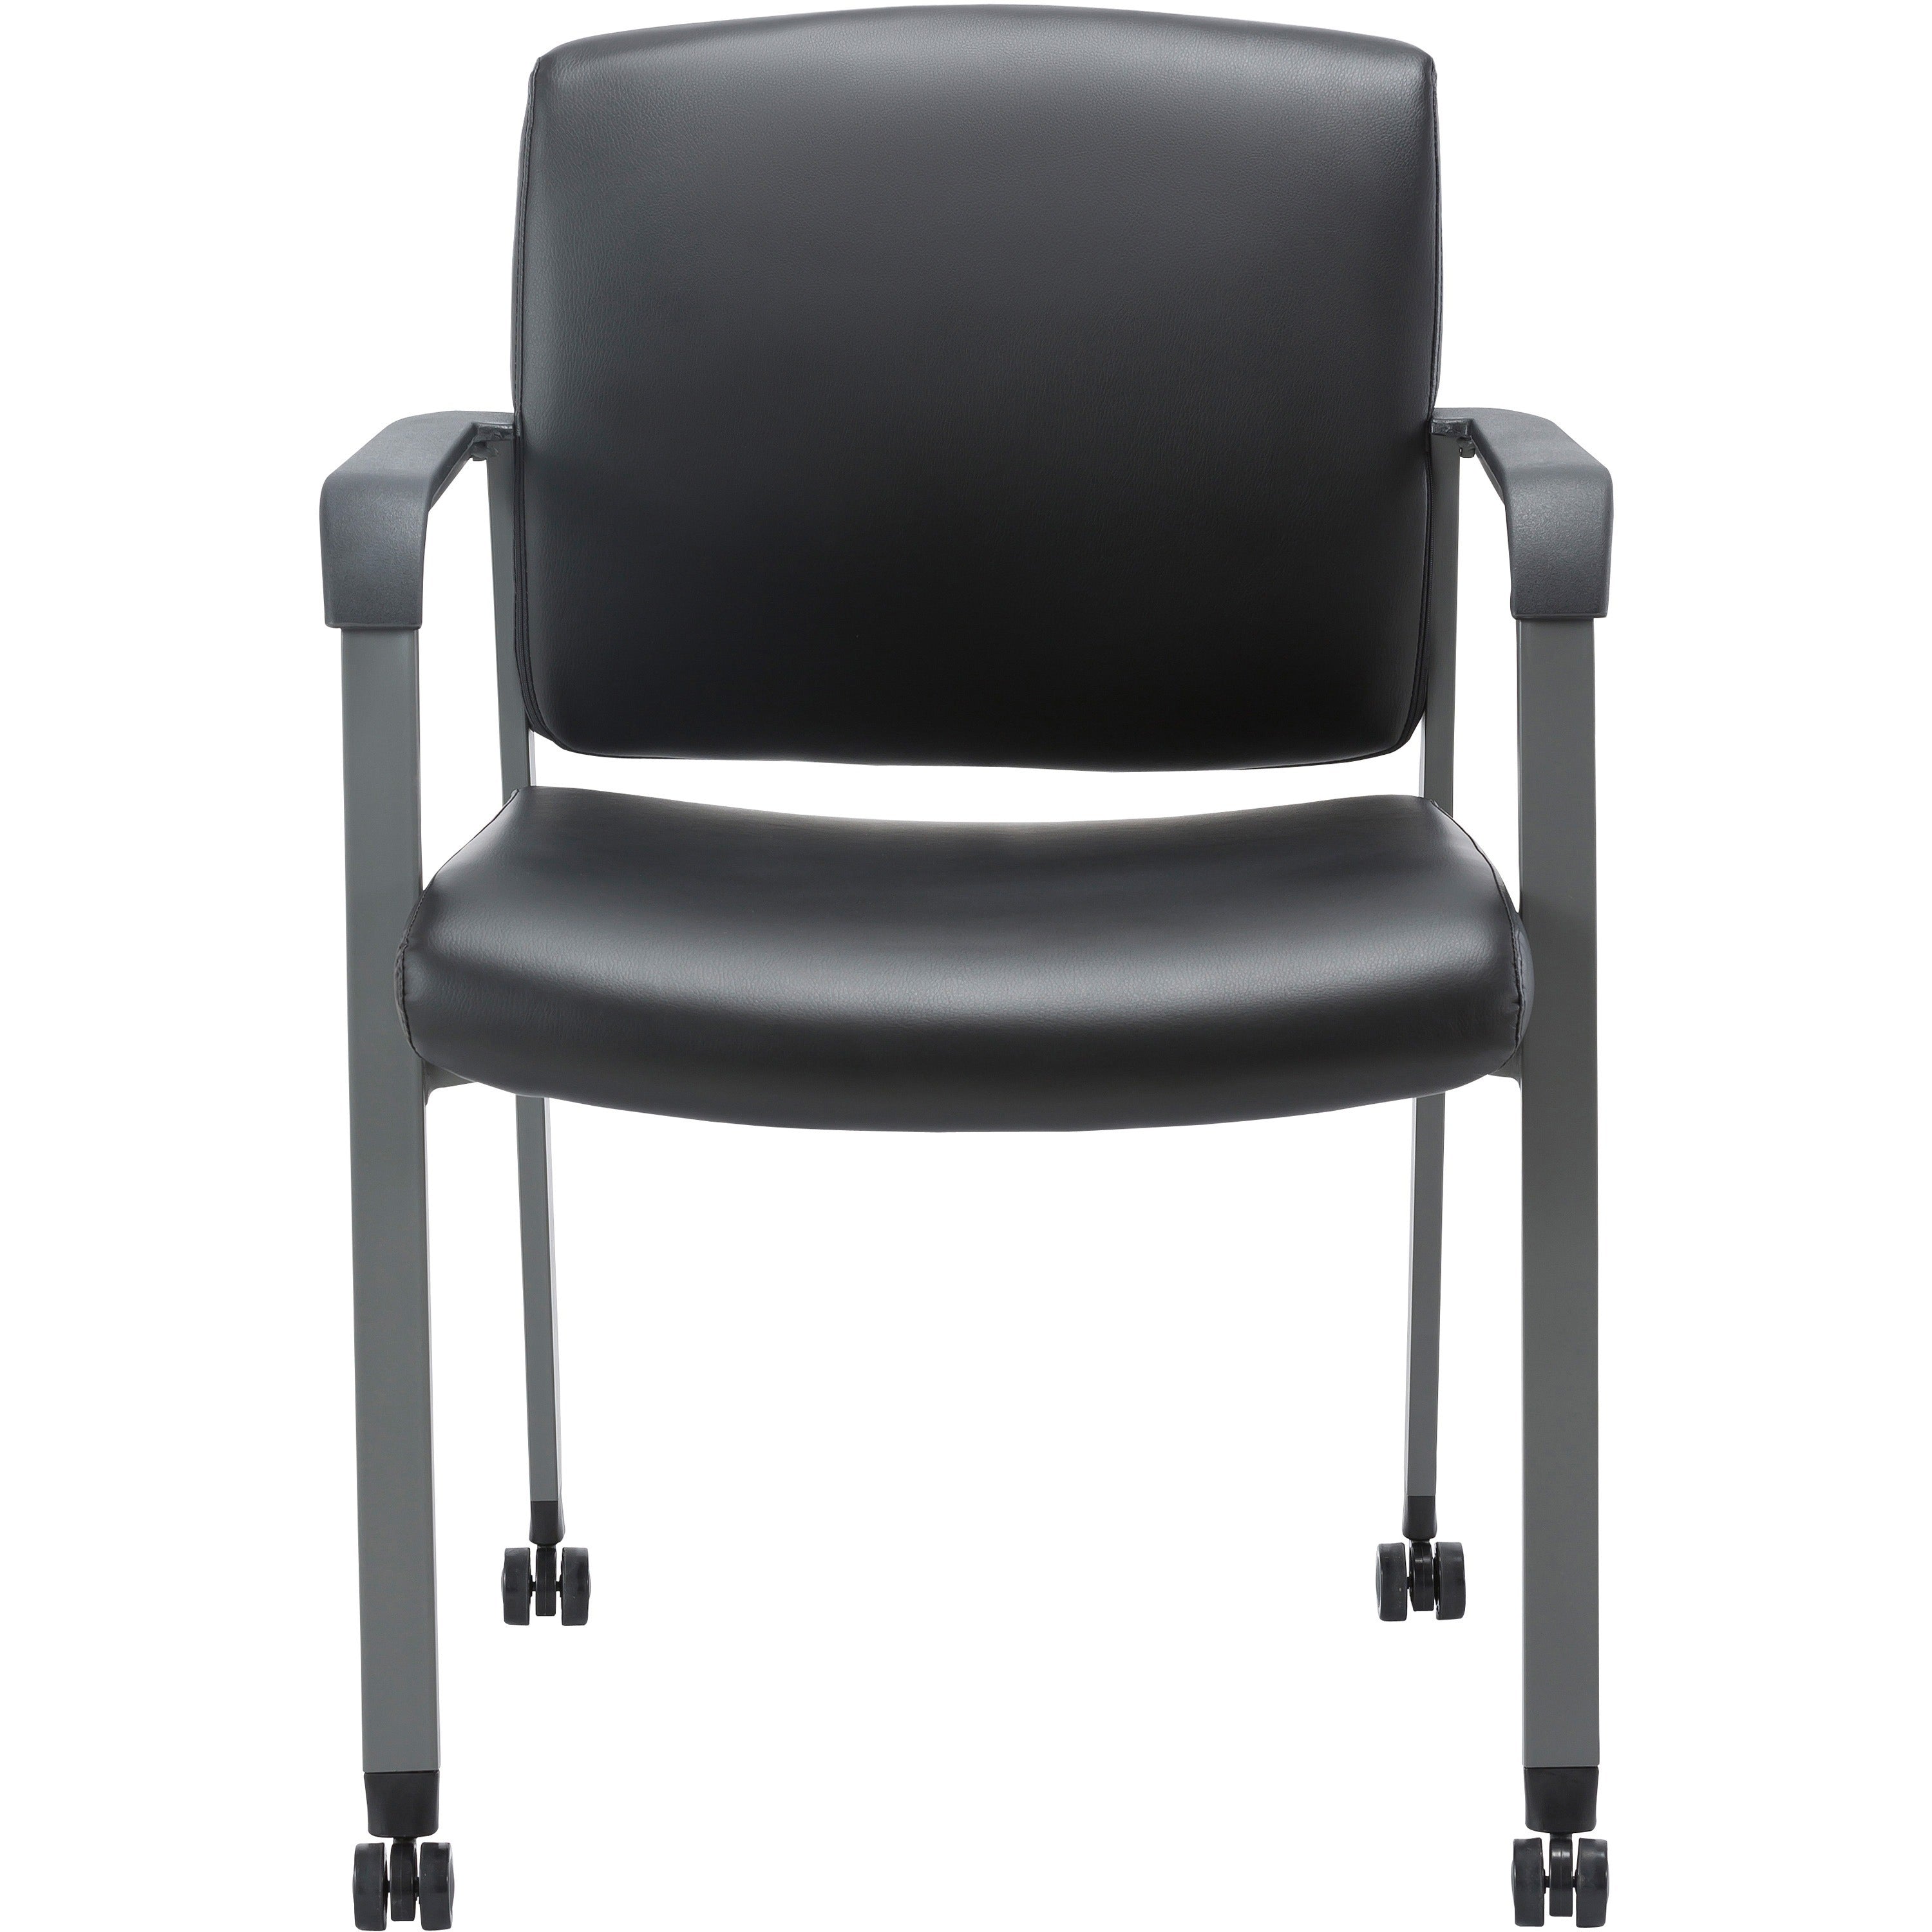 lorell-healthcare-upholstery-guest-chair-with-casters-vinyl-seat-vinyl-back-steel-frame-square-base-black-armrest-1-each_llr30951 - 2